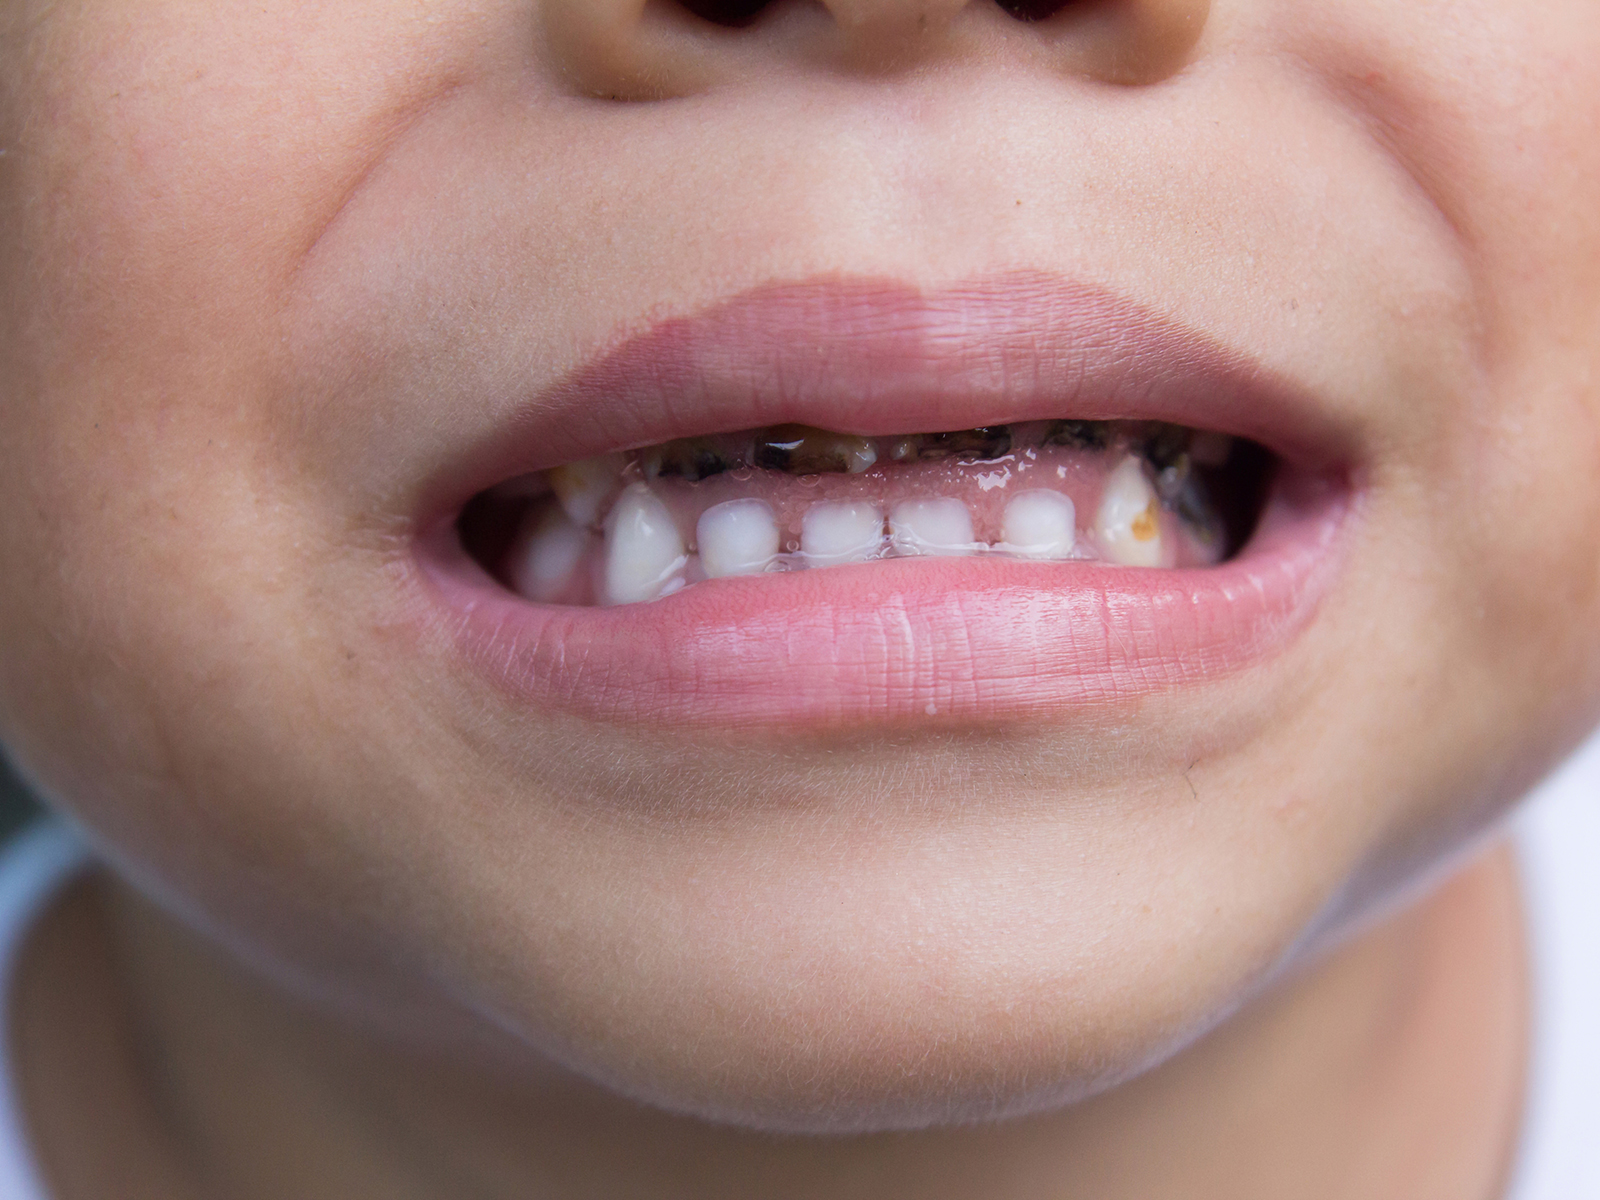 Do genetics play a role in tooth decay?